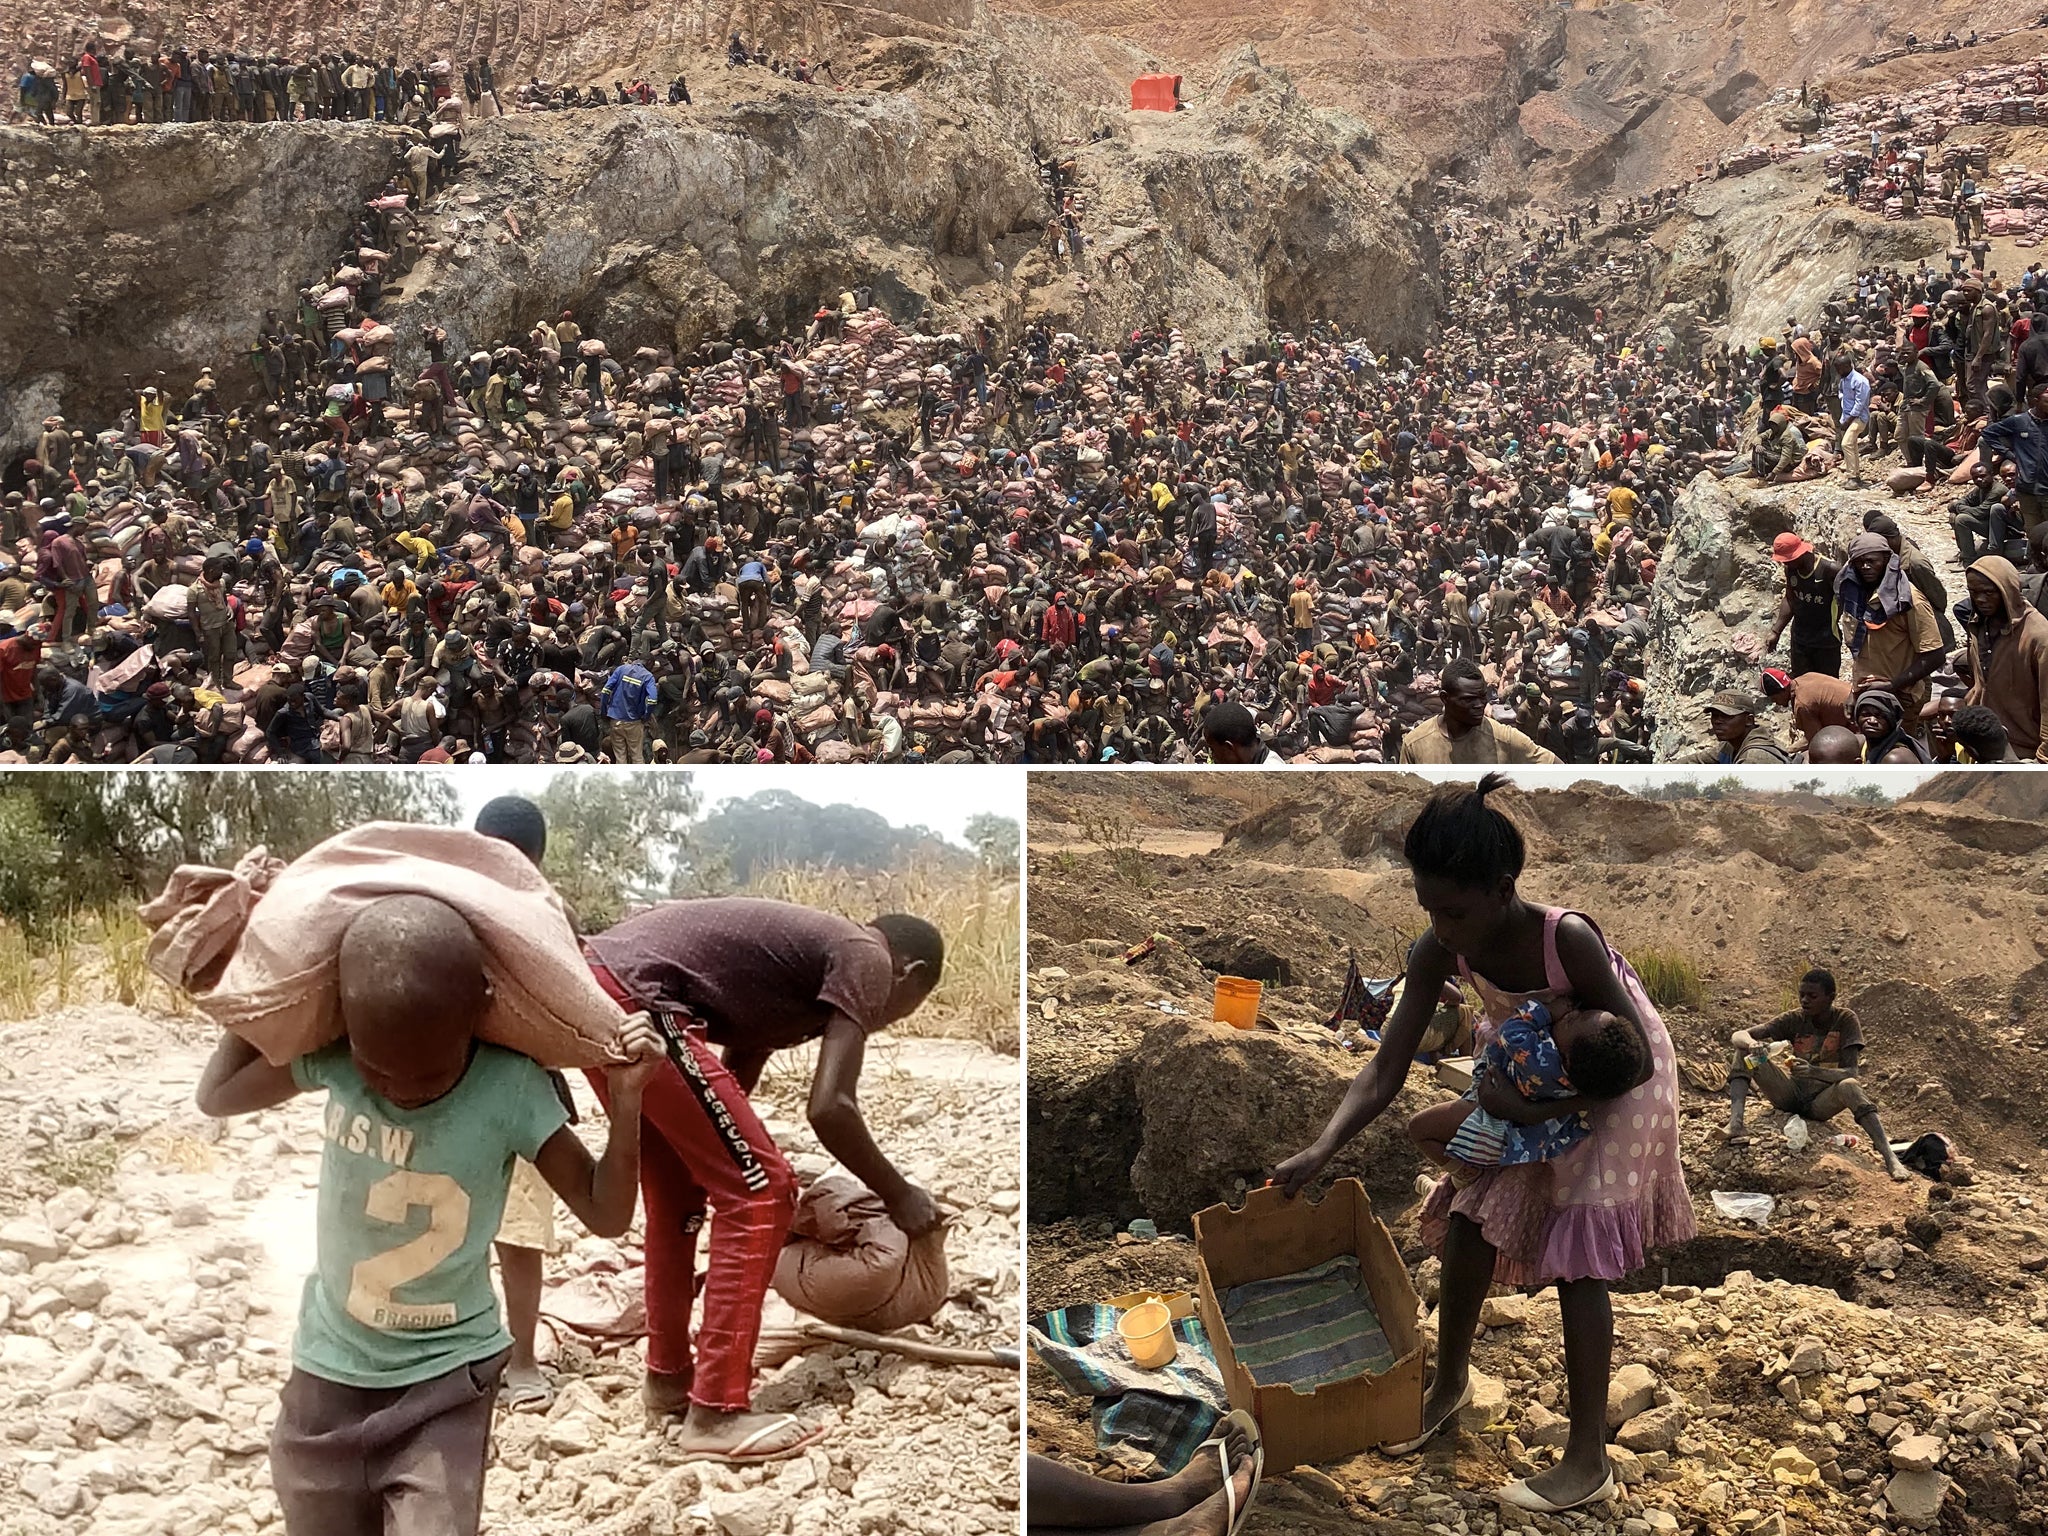 Picture of artisanal cobalt mining in the DRC illustrating child labour